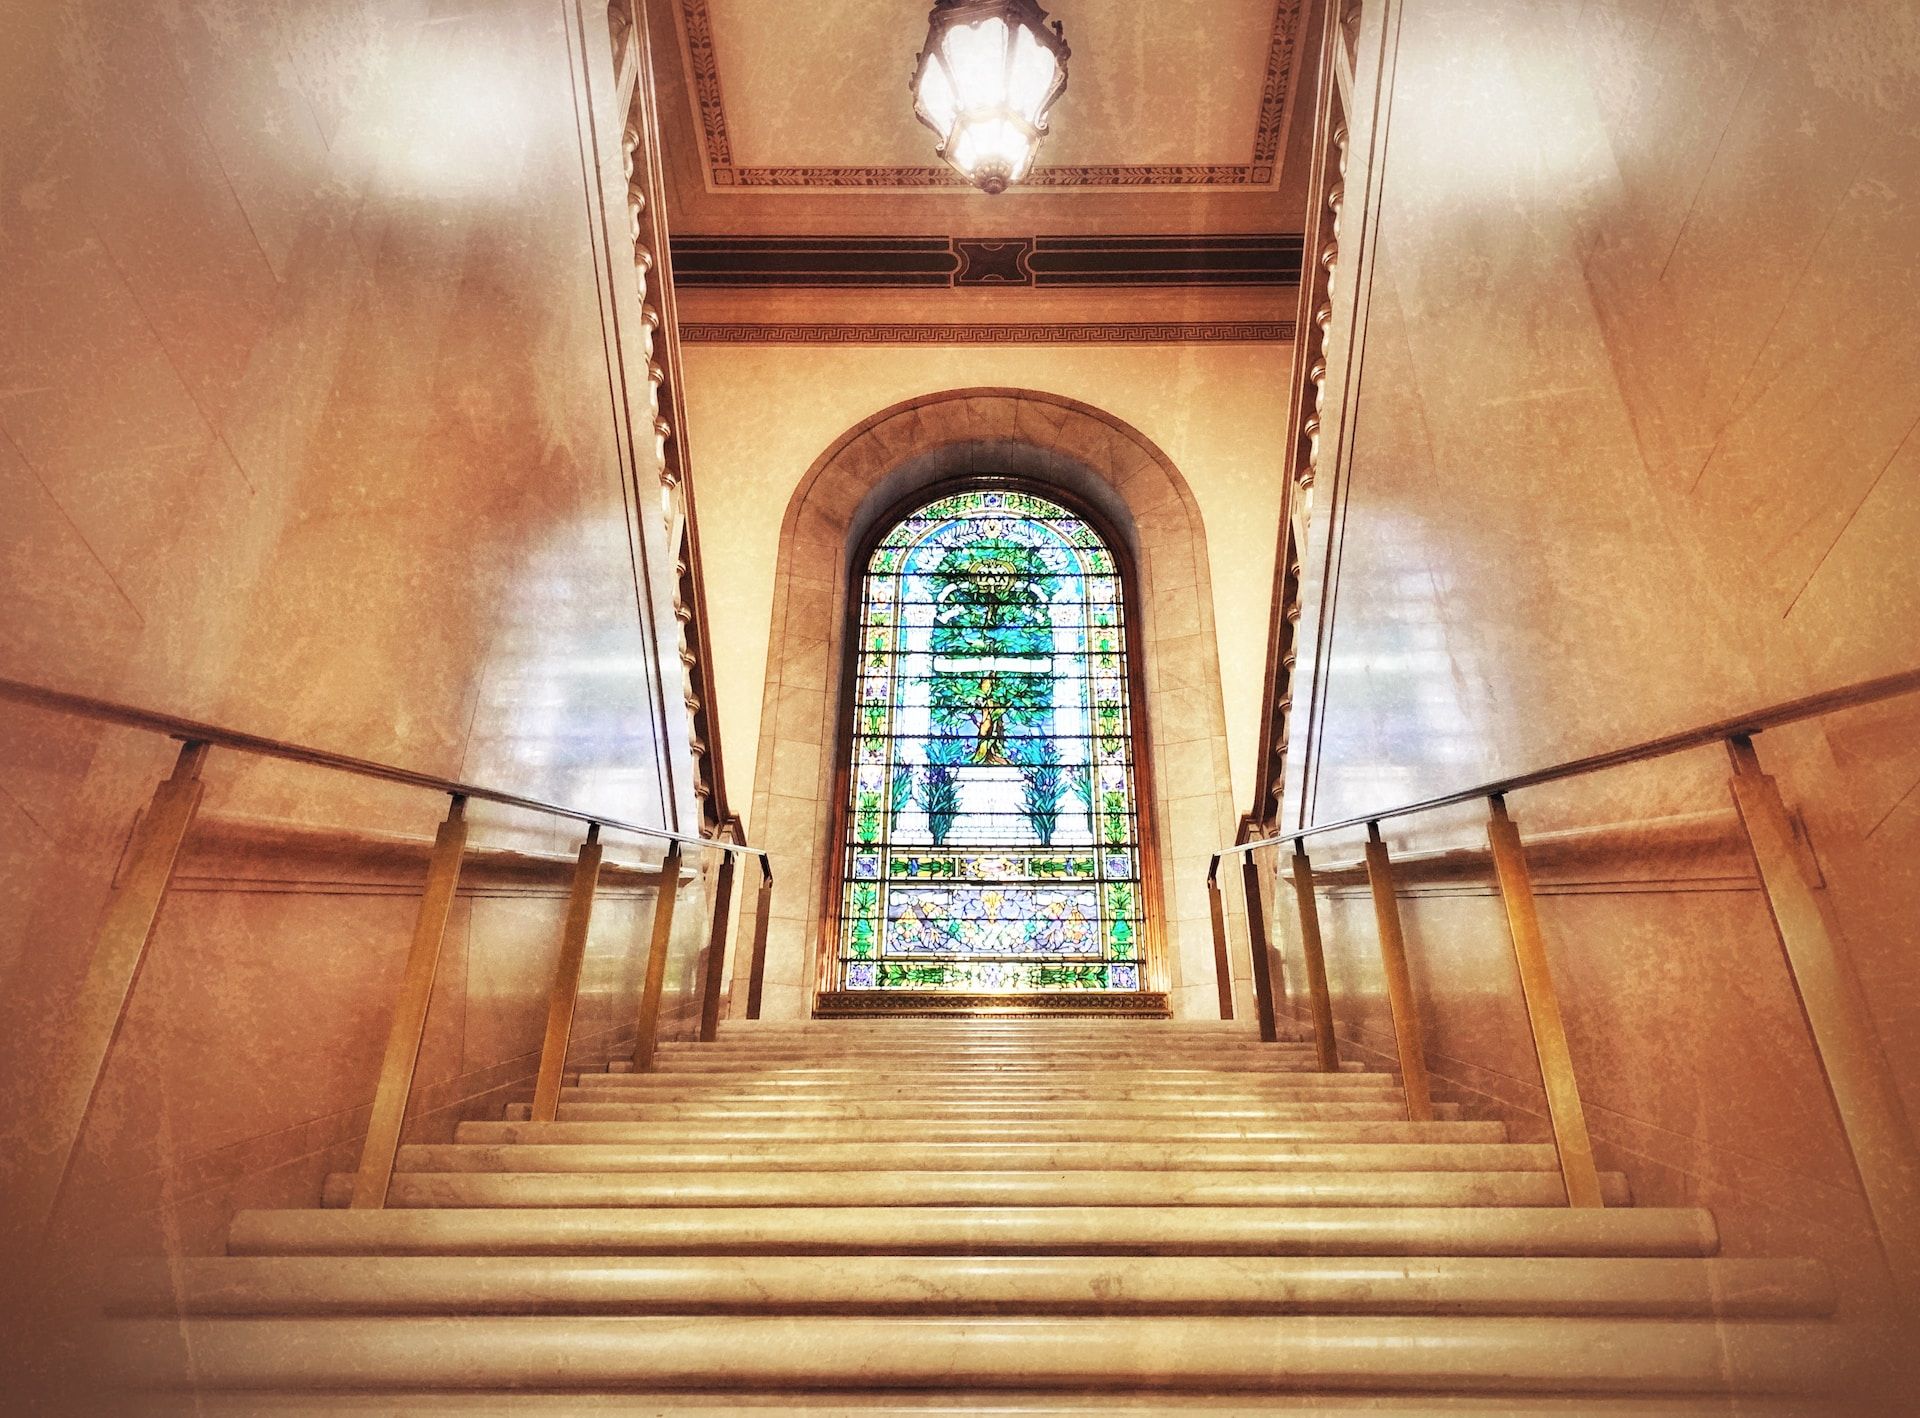 Stairs At St. Louis Public Library - Central Library, St. Louis, United States